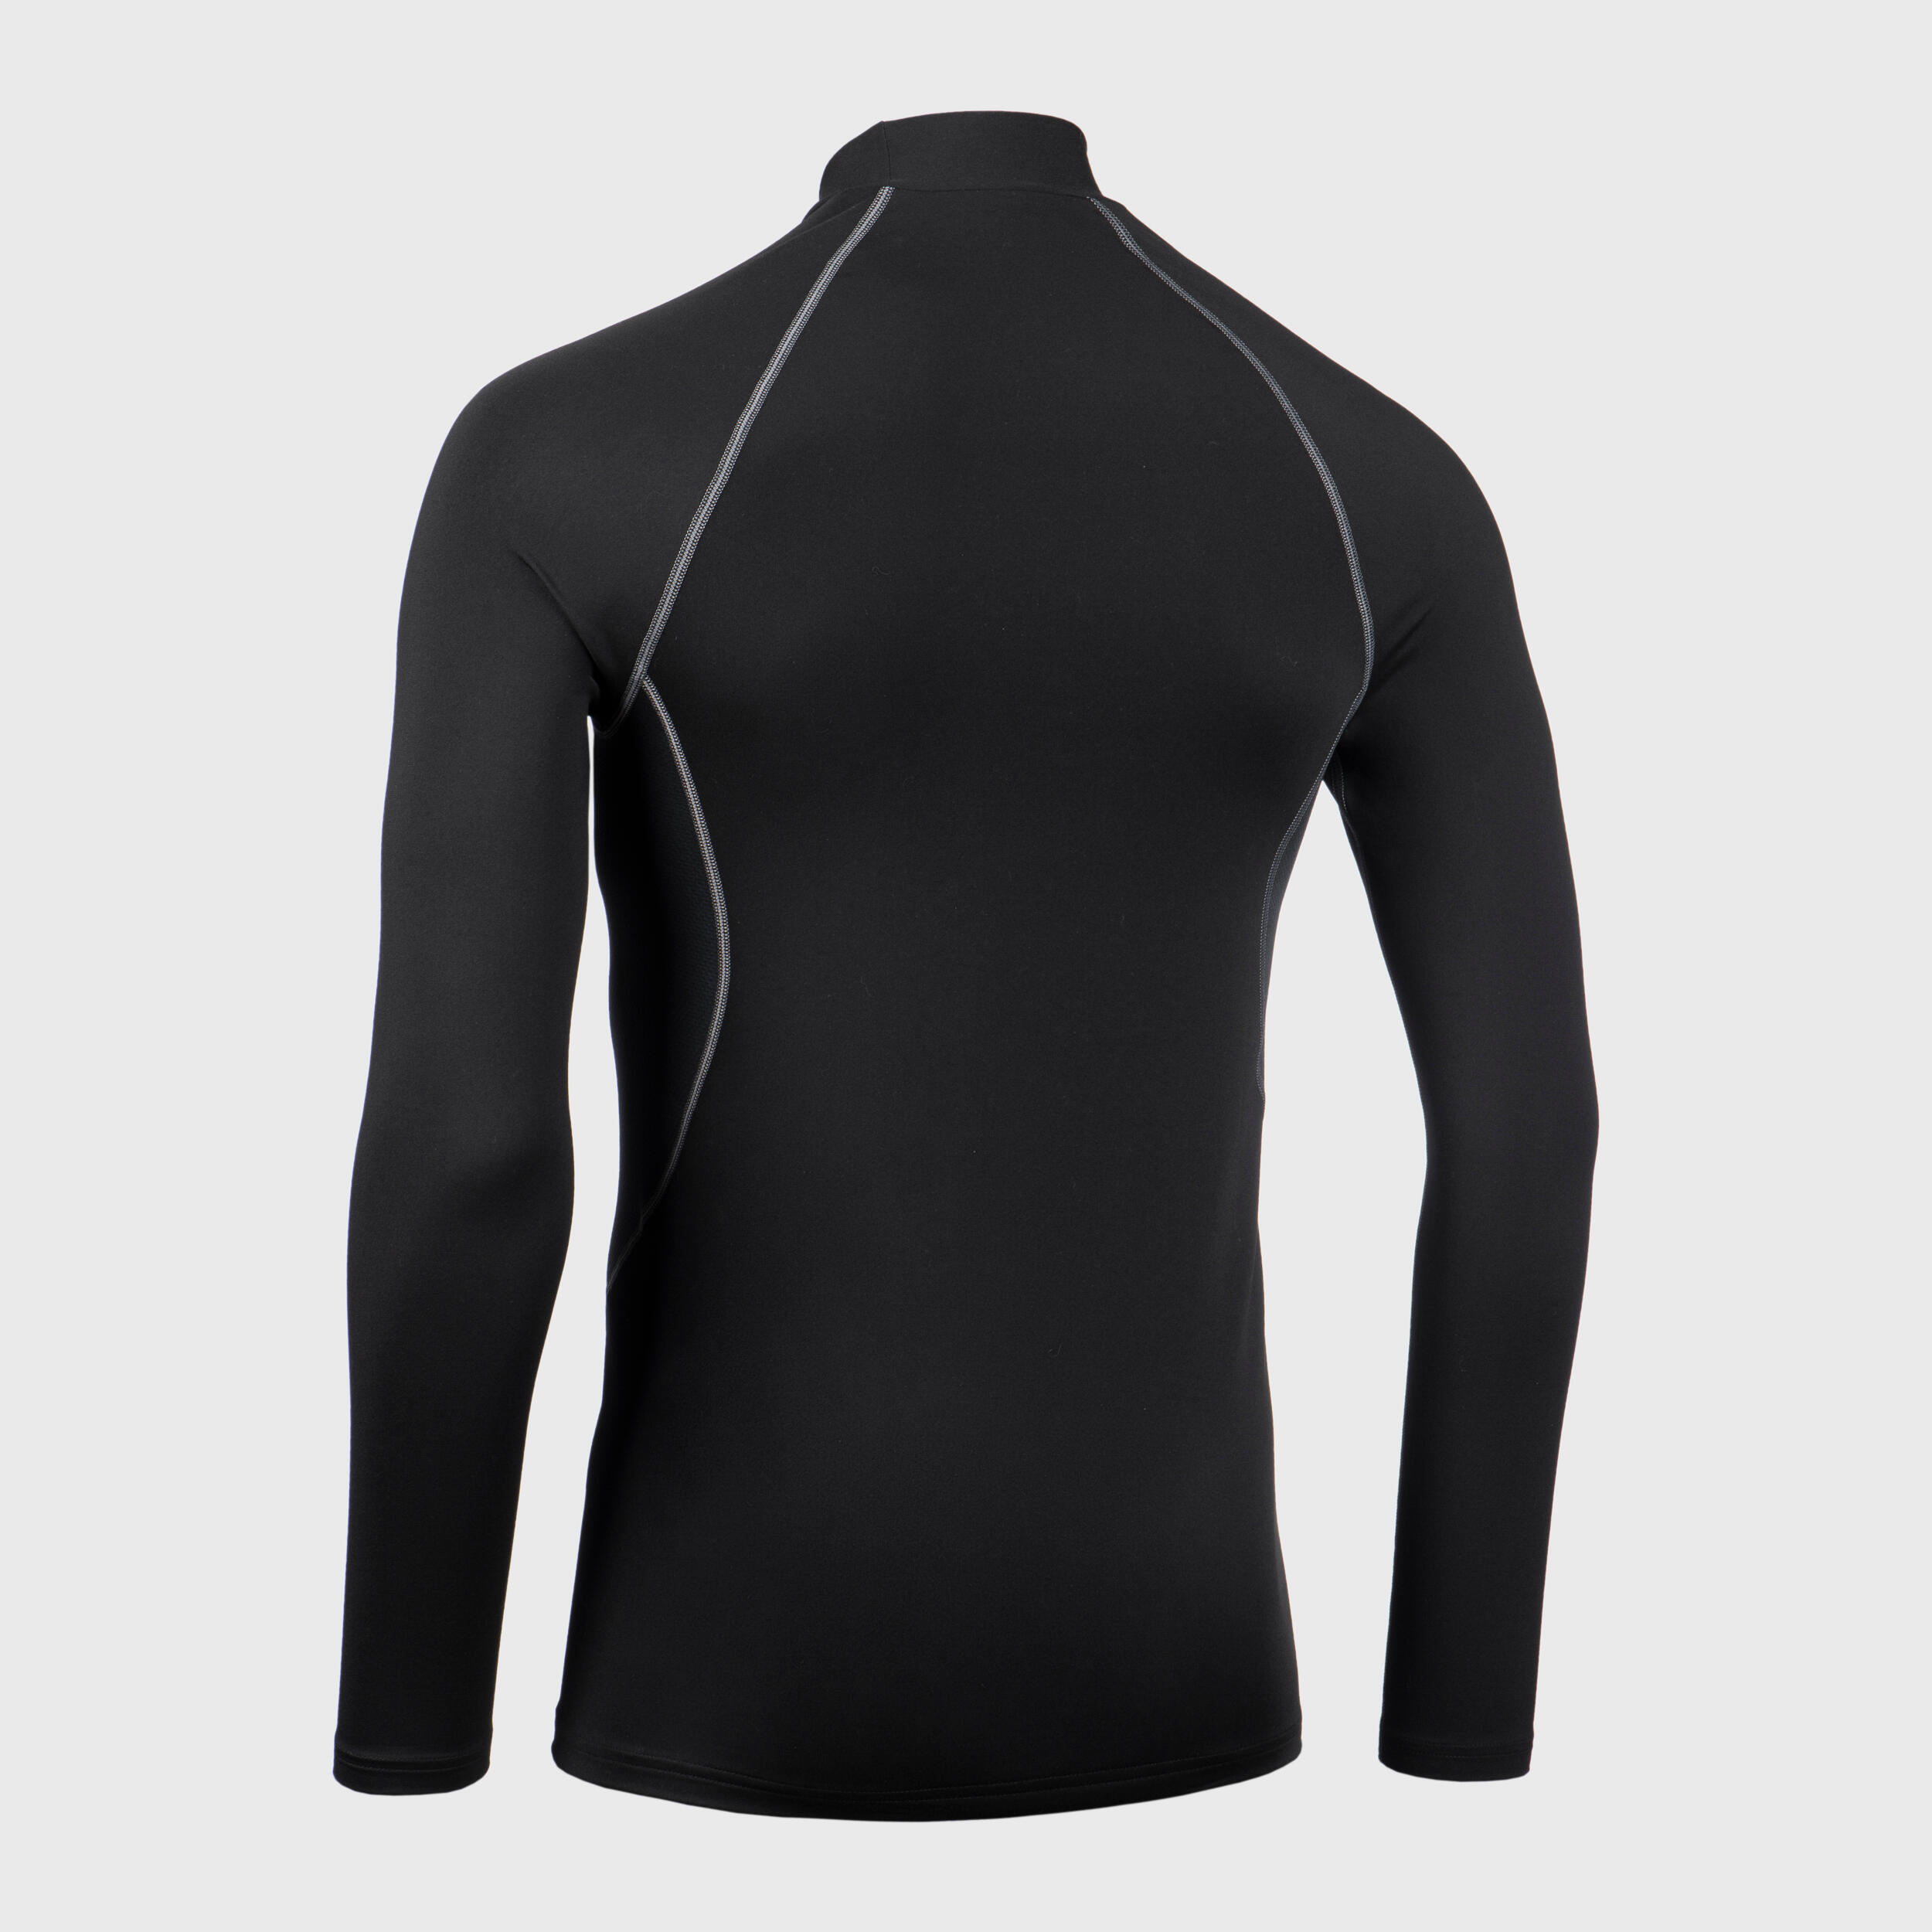 Men's Long-Sleeved Rugby Base Layer Top R500 - Black 2/5